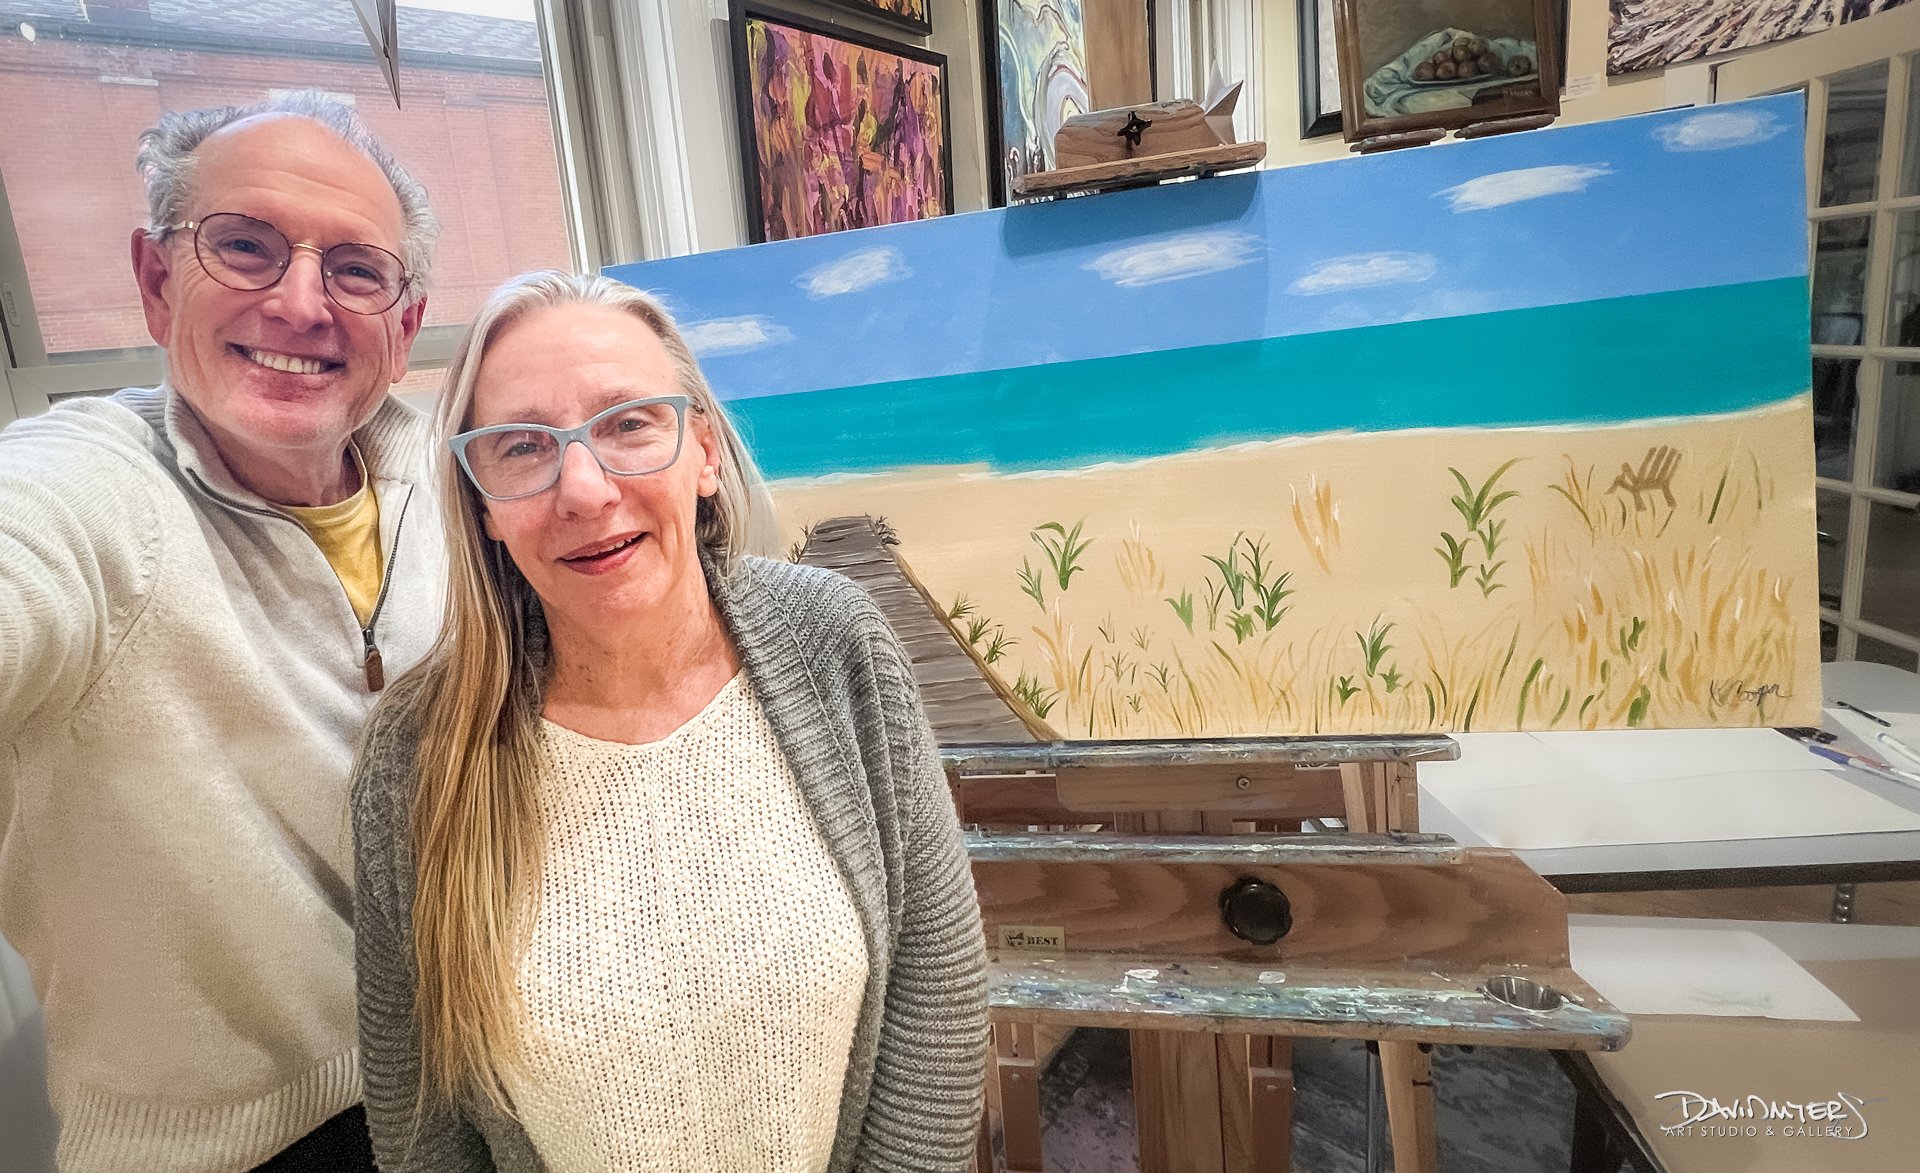 &quot;It's not trespassing to go beyond your own boundaries.&quot; -Dewitt Jones

Kathleen Cooper creates her 1st painting &quot;My Happy Place!&quot; Well done Kathleen!

#ArtinthHeartofUptown #UptownWesterville #VisitWesterville #UniquelyWestervill